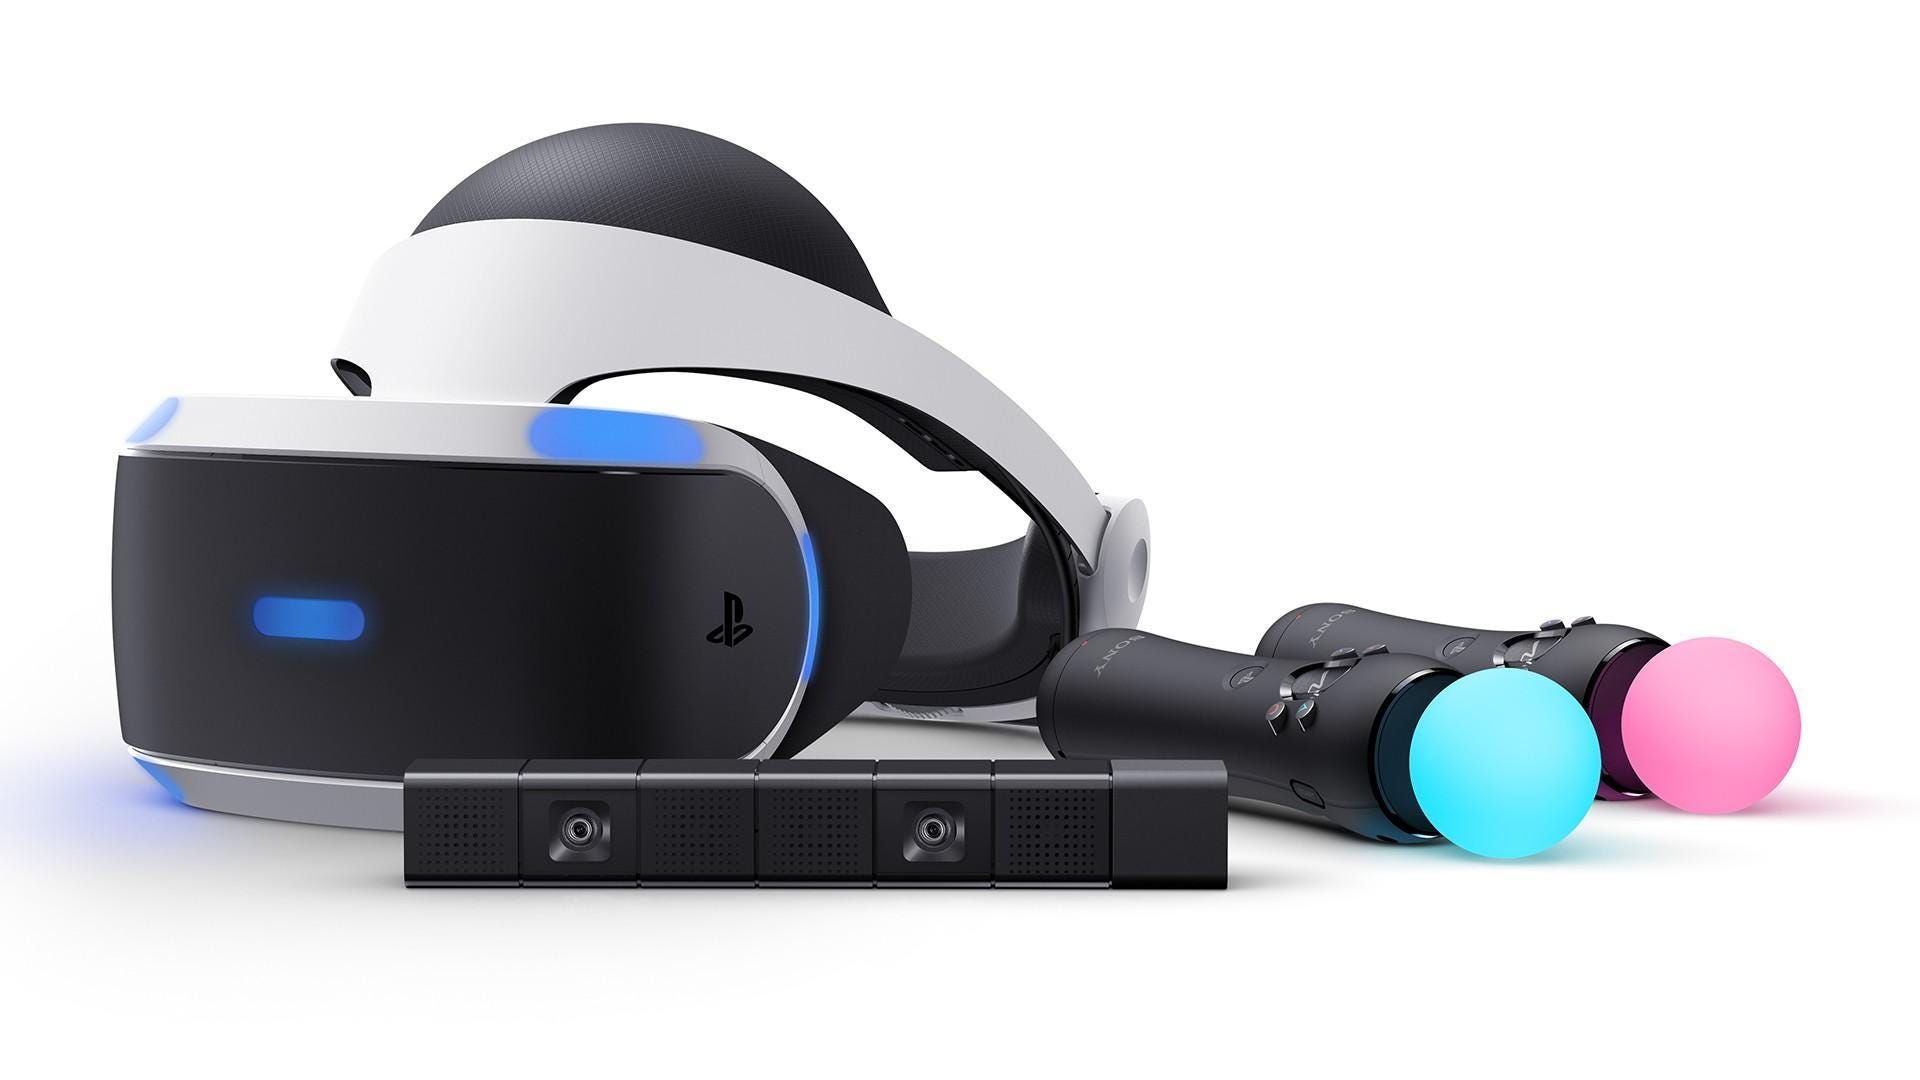 PlayStation VR. Everything you need to know about Sony's reality headset by Deniz Ergürel | Haptical